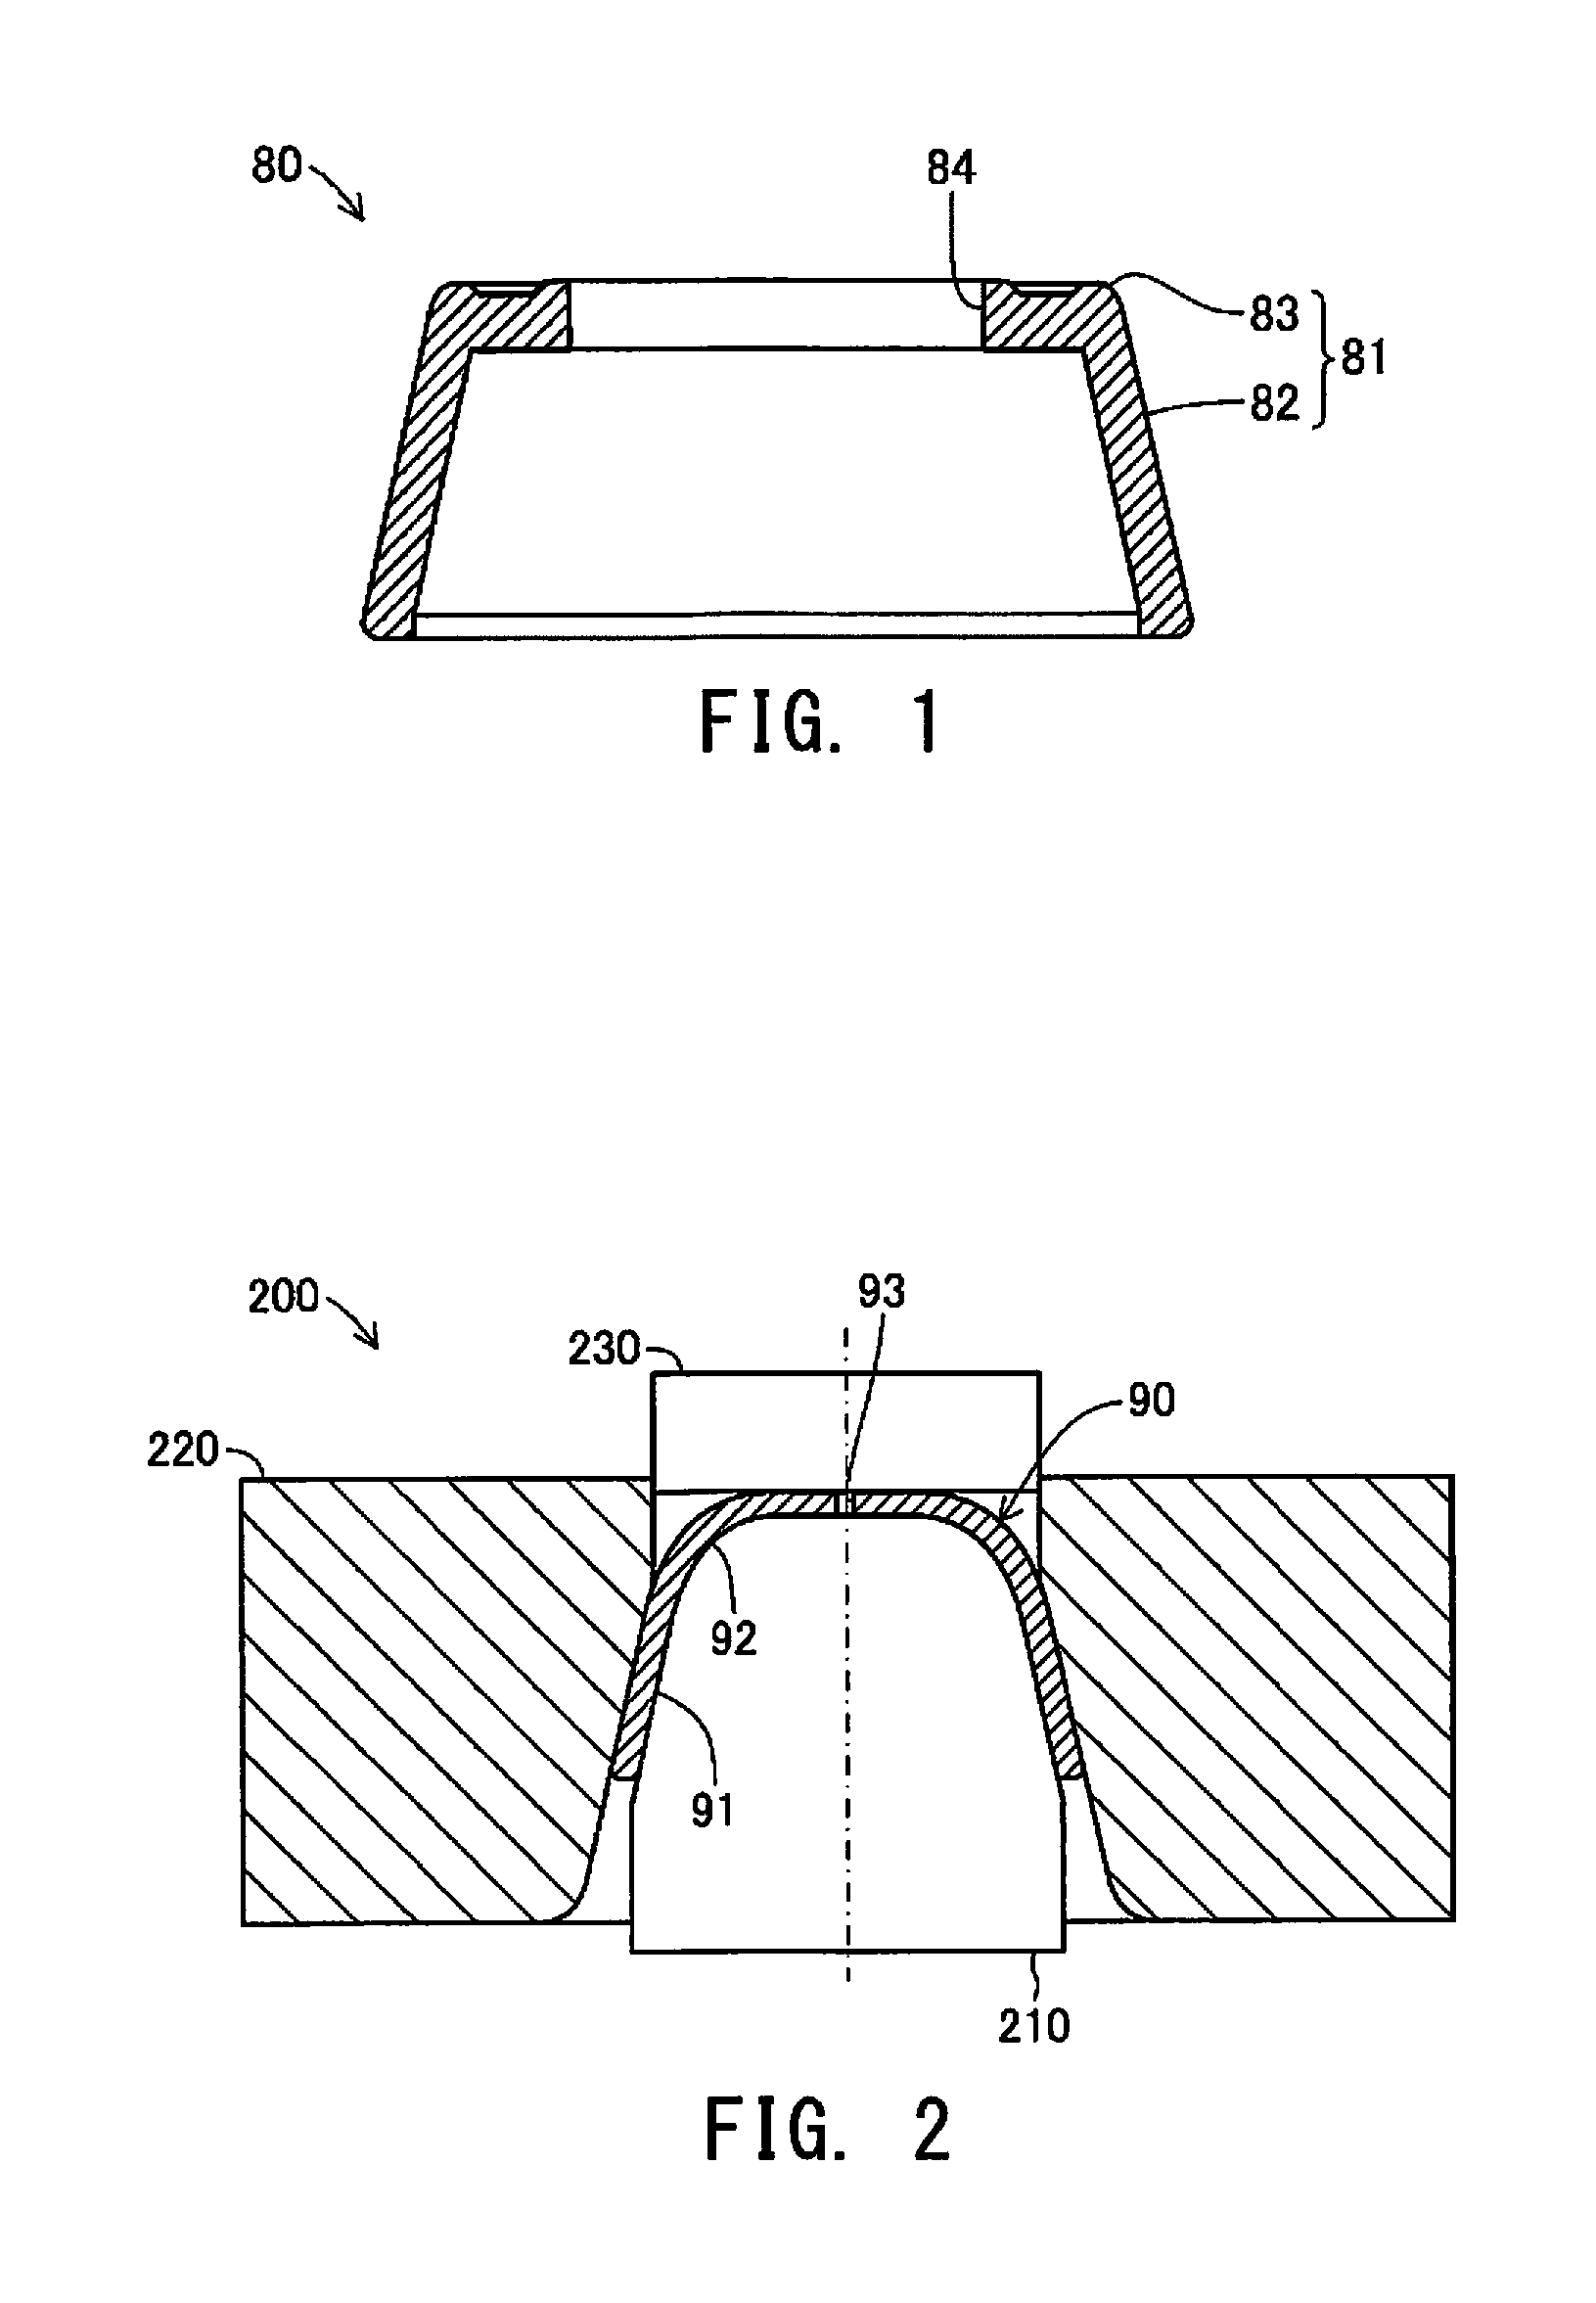 Method for forming a pressed component, method for manufacturing a pressed component, and die apparatus for forming a pressed component